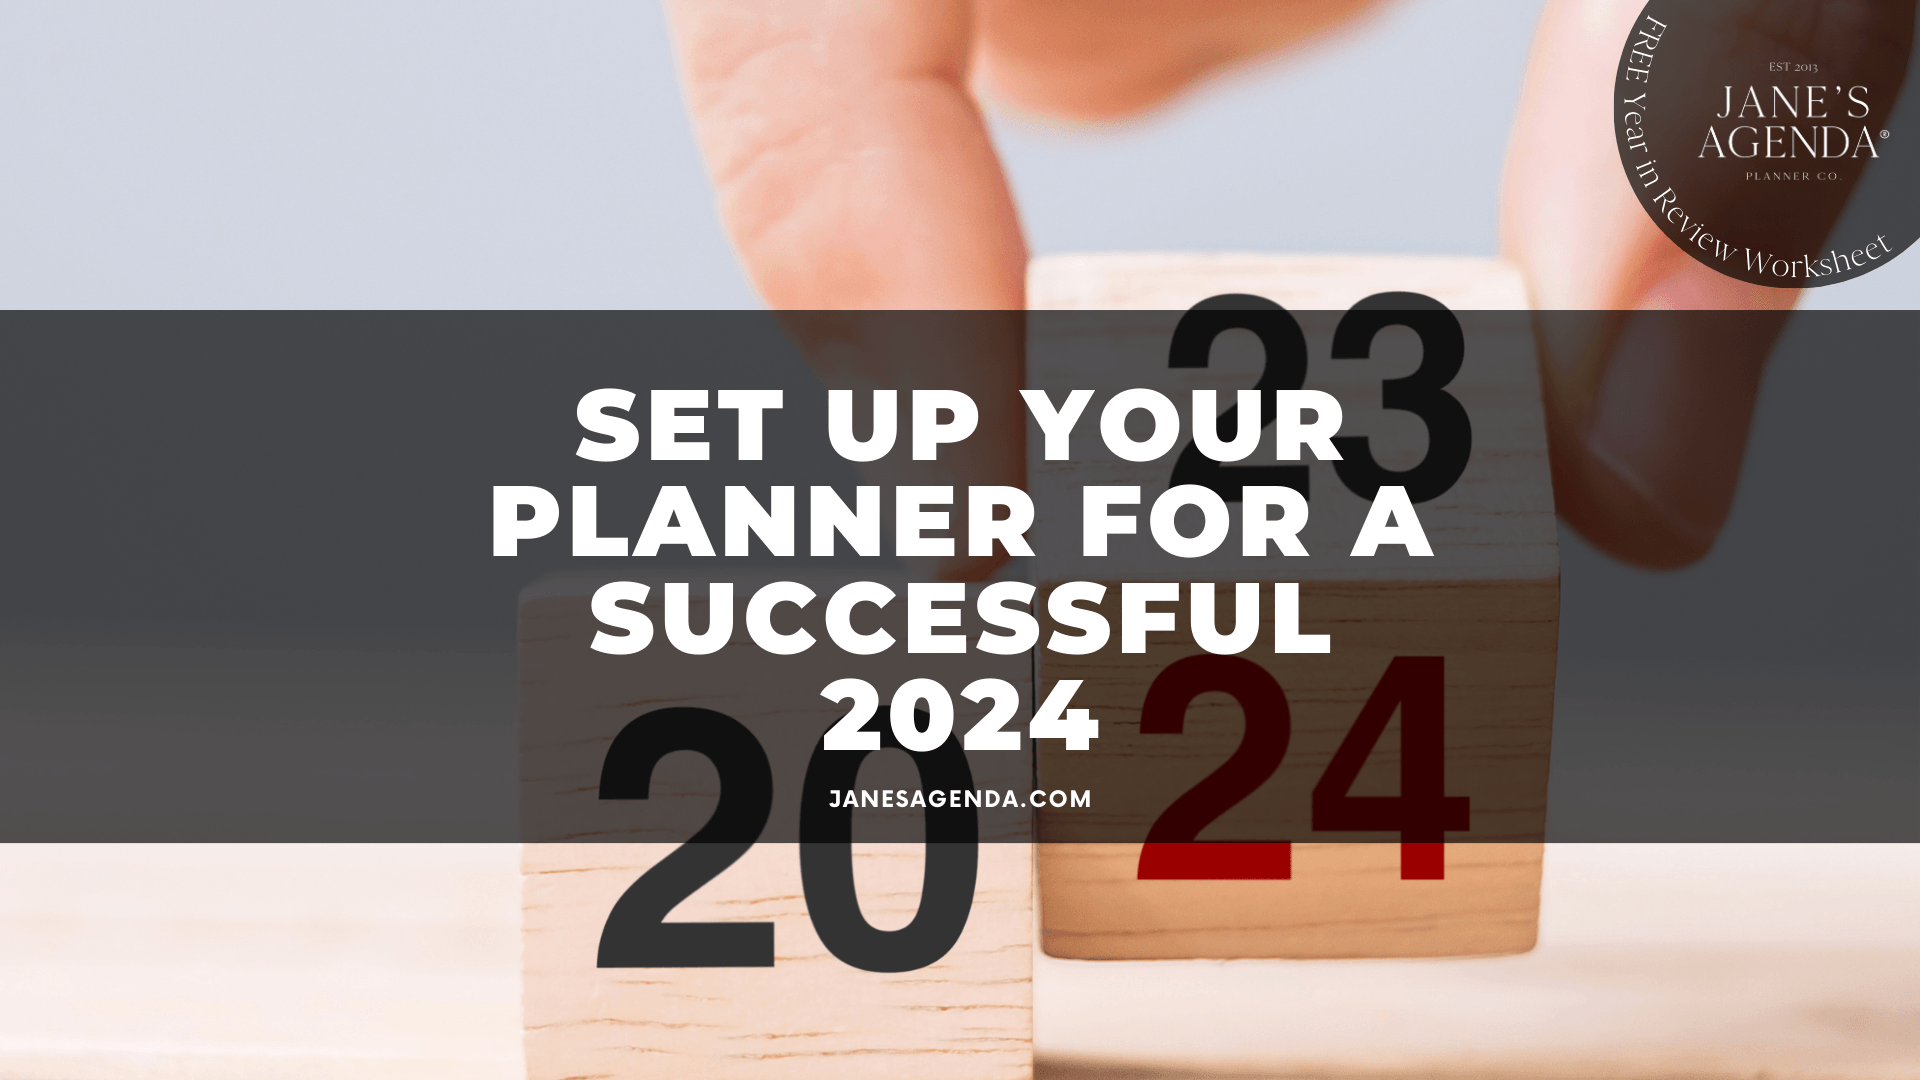 Set Up Your Planner for a Successful 2024